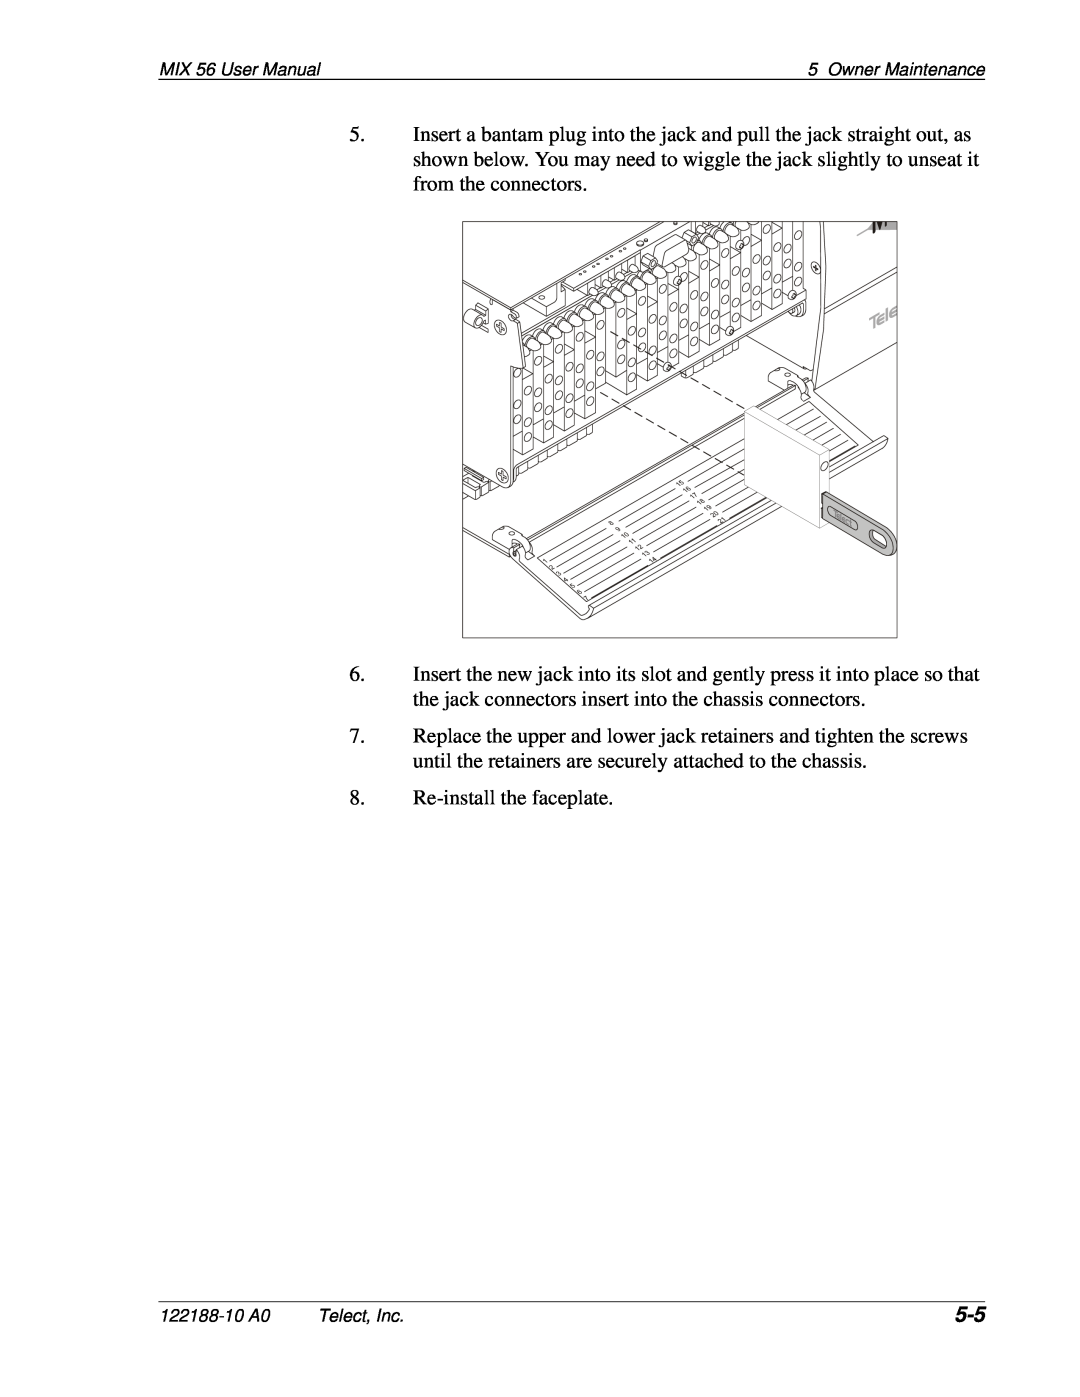 Telect MIX 56 user manual Re-install the faceplate 